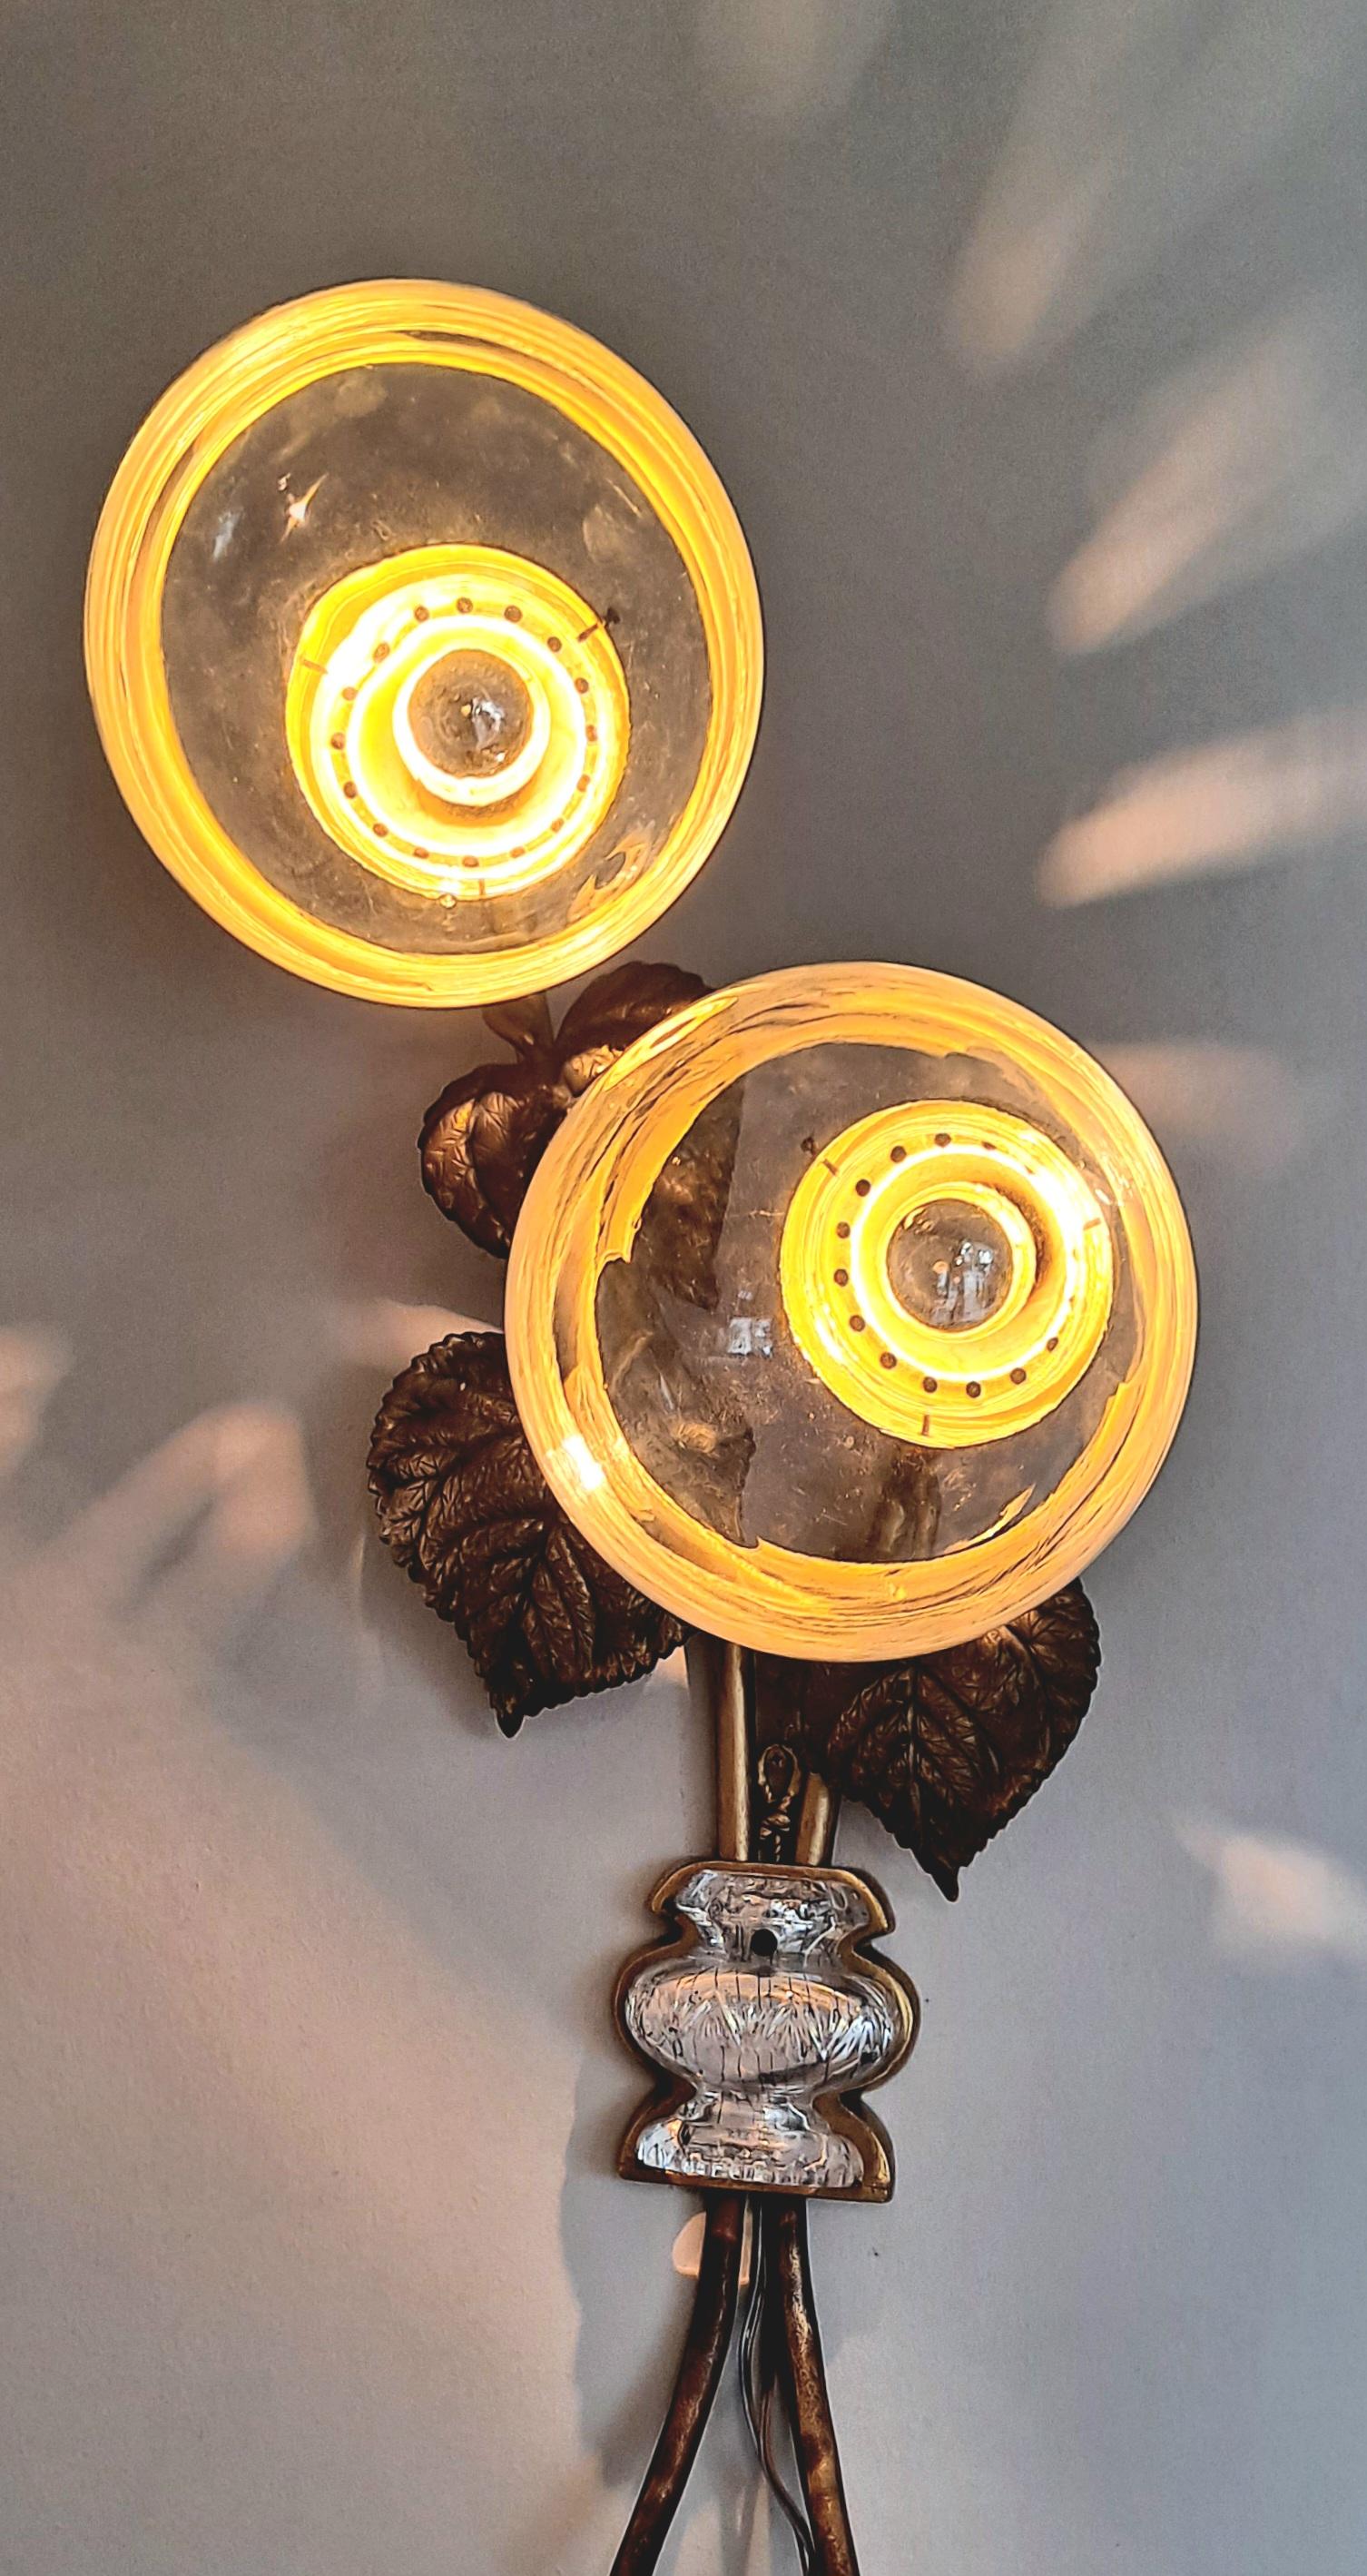 Italian Art Deco brass and  metal sconces decorated with brass leaves  and  glass globes. Wall sconce is stunning Italian antique design. This is a large wall sconce size . Shipping UPS or FedEx standard parcel with insurance 
5-7 days  $125 